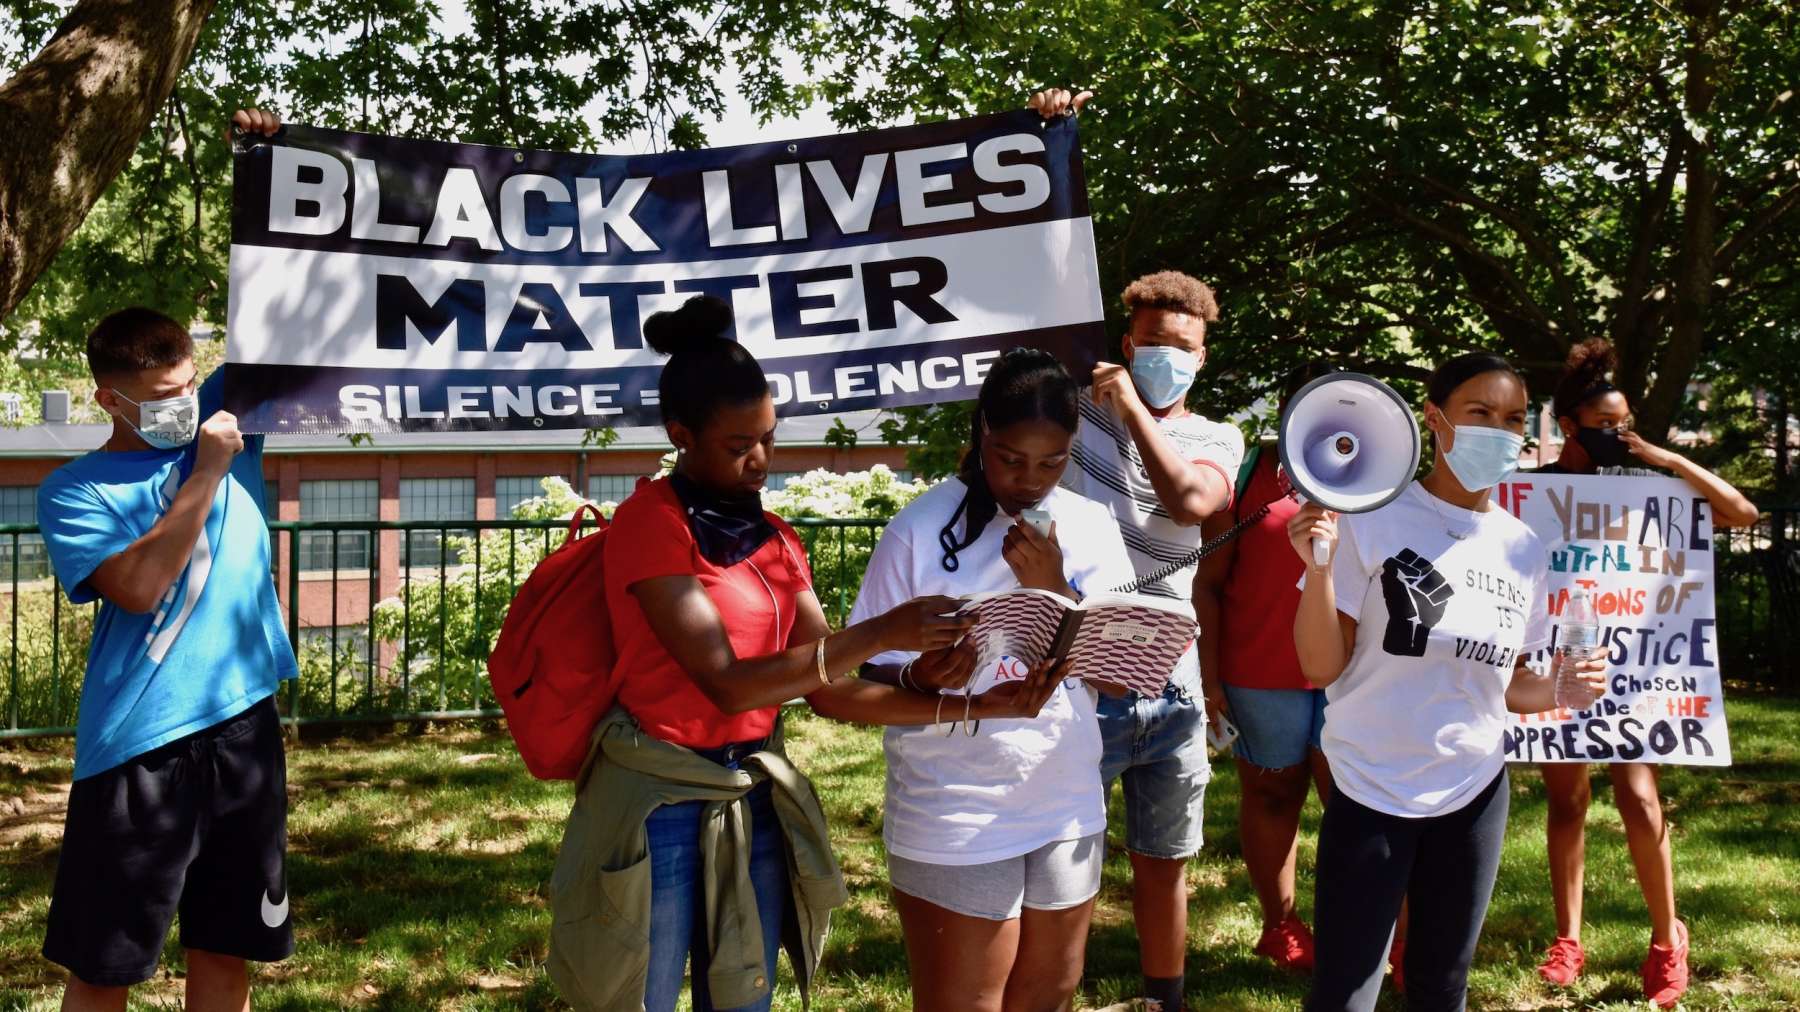 Rhode Island News: Silence is Violence: A youth led protest for Black lives in Woonsocket